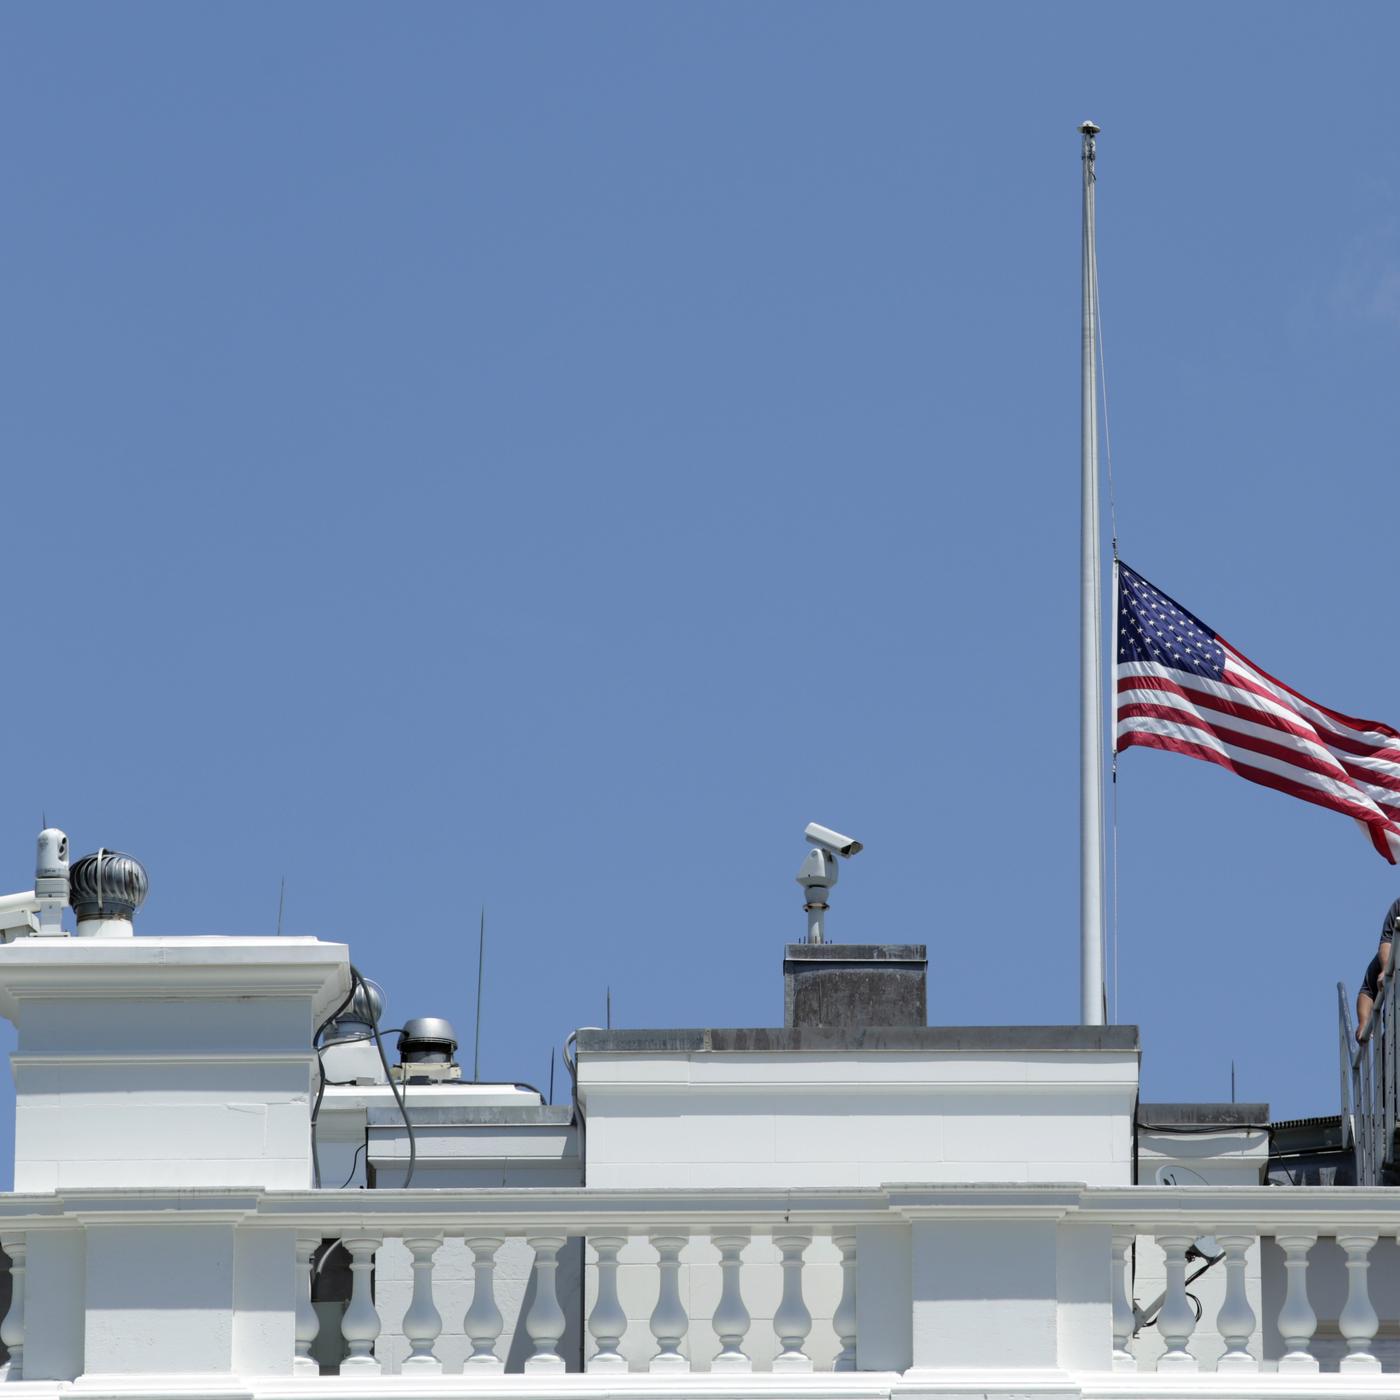 Days After Rest of Country, Christie Finally Orders Flags Lowered To
Honor the Dead in Orlando